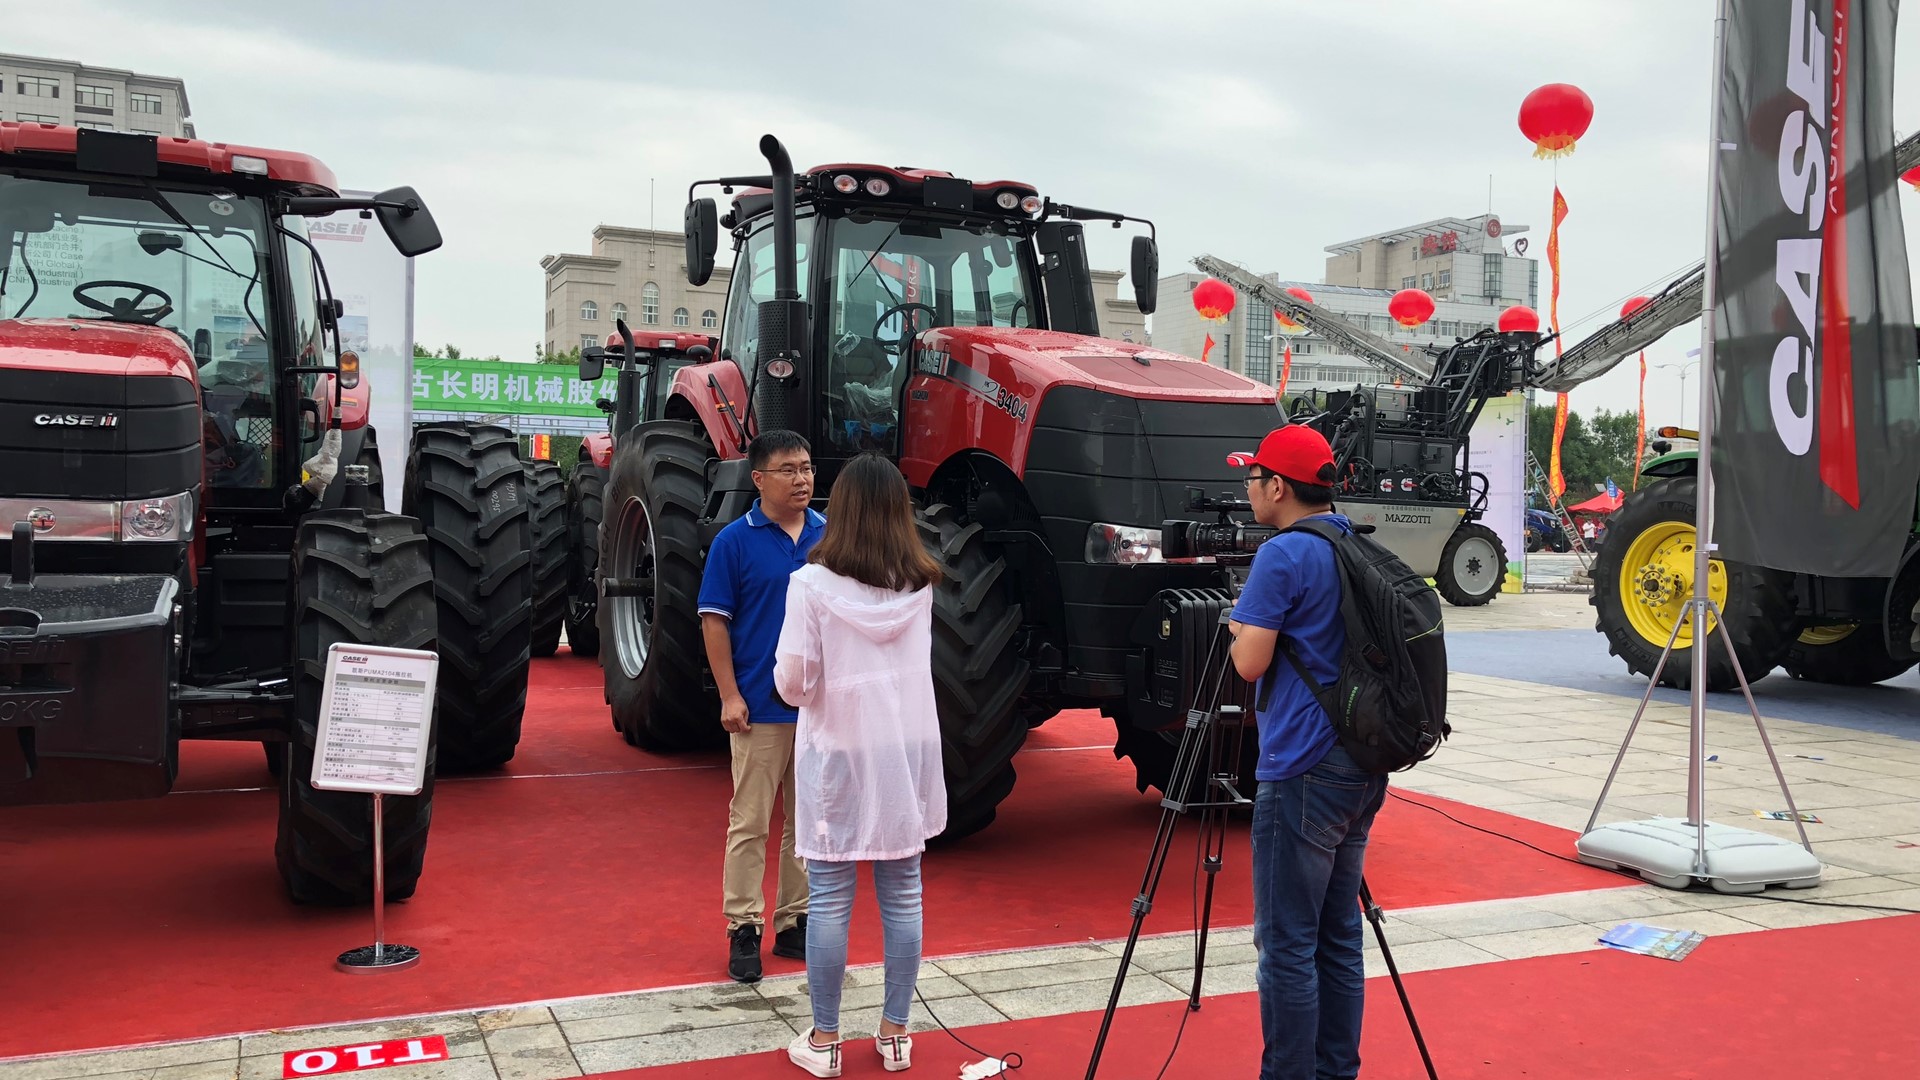 The Case IH stand at the Inner Mongolia Expo